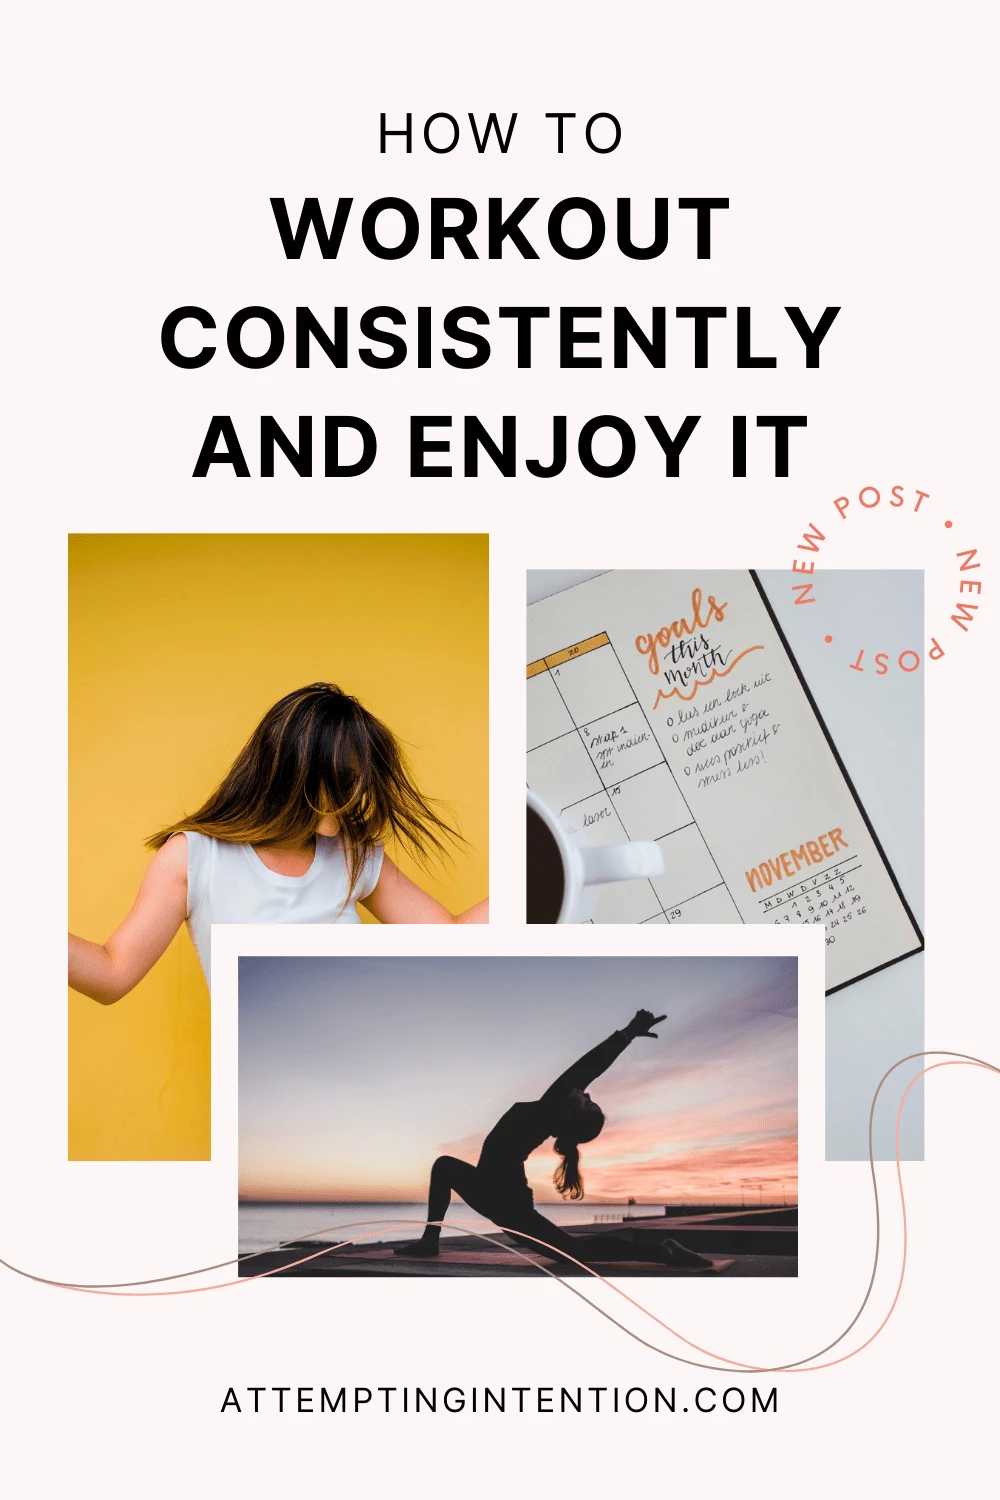 How to workout consistently and enjoy it